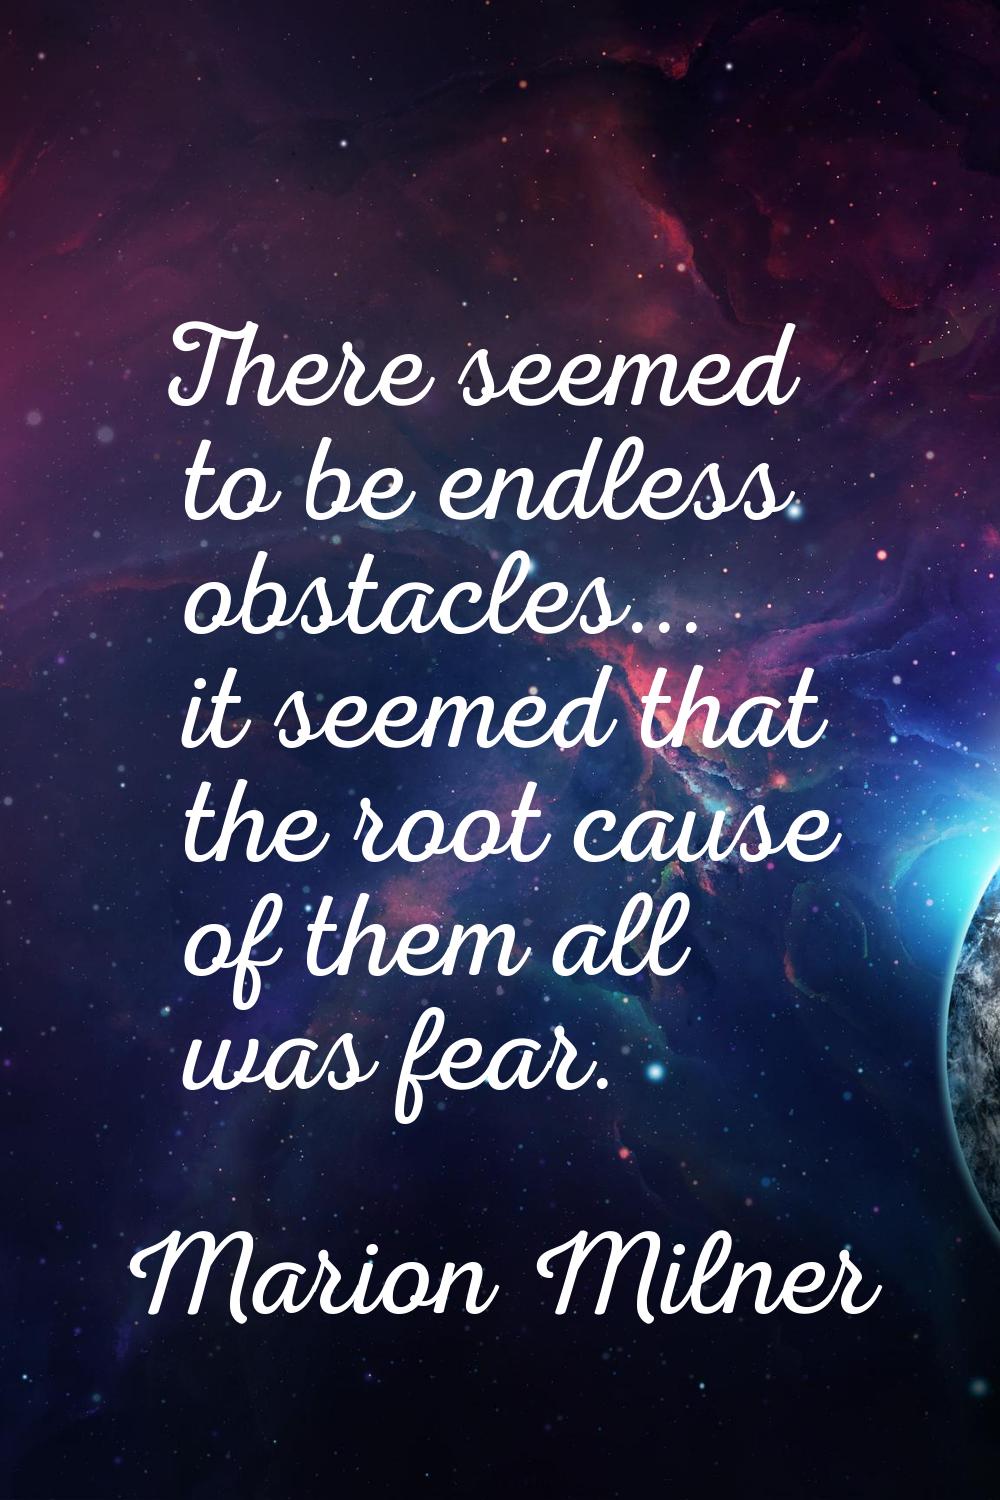 There seemed to be endless obstacles... it seemed that the root cause of them all was fear.